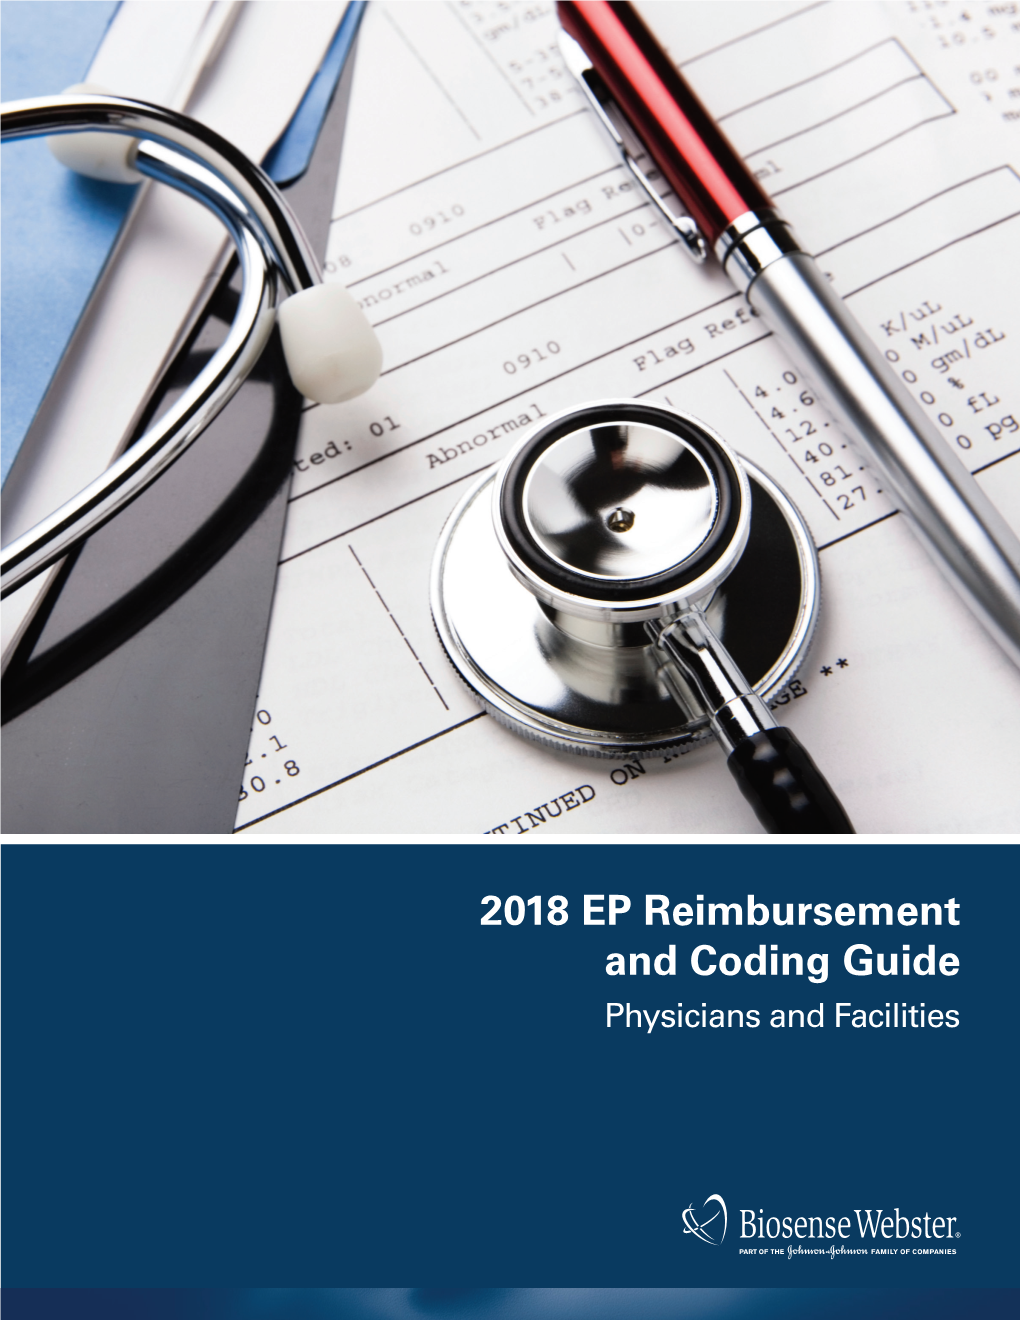 2018 EP Reimbursement and Coding Guide Physicians and Facilities Resources to Assist You with the Reimbursement Process!